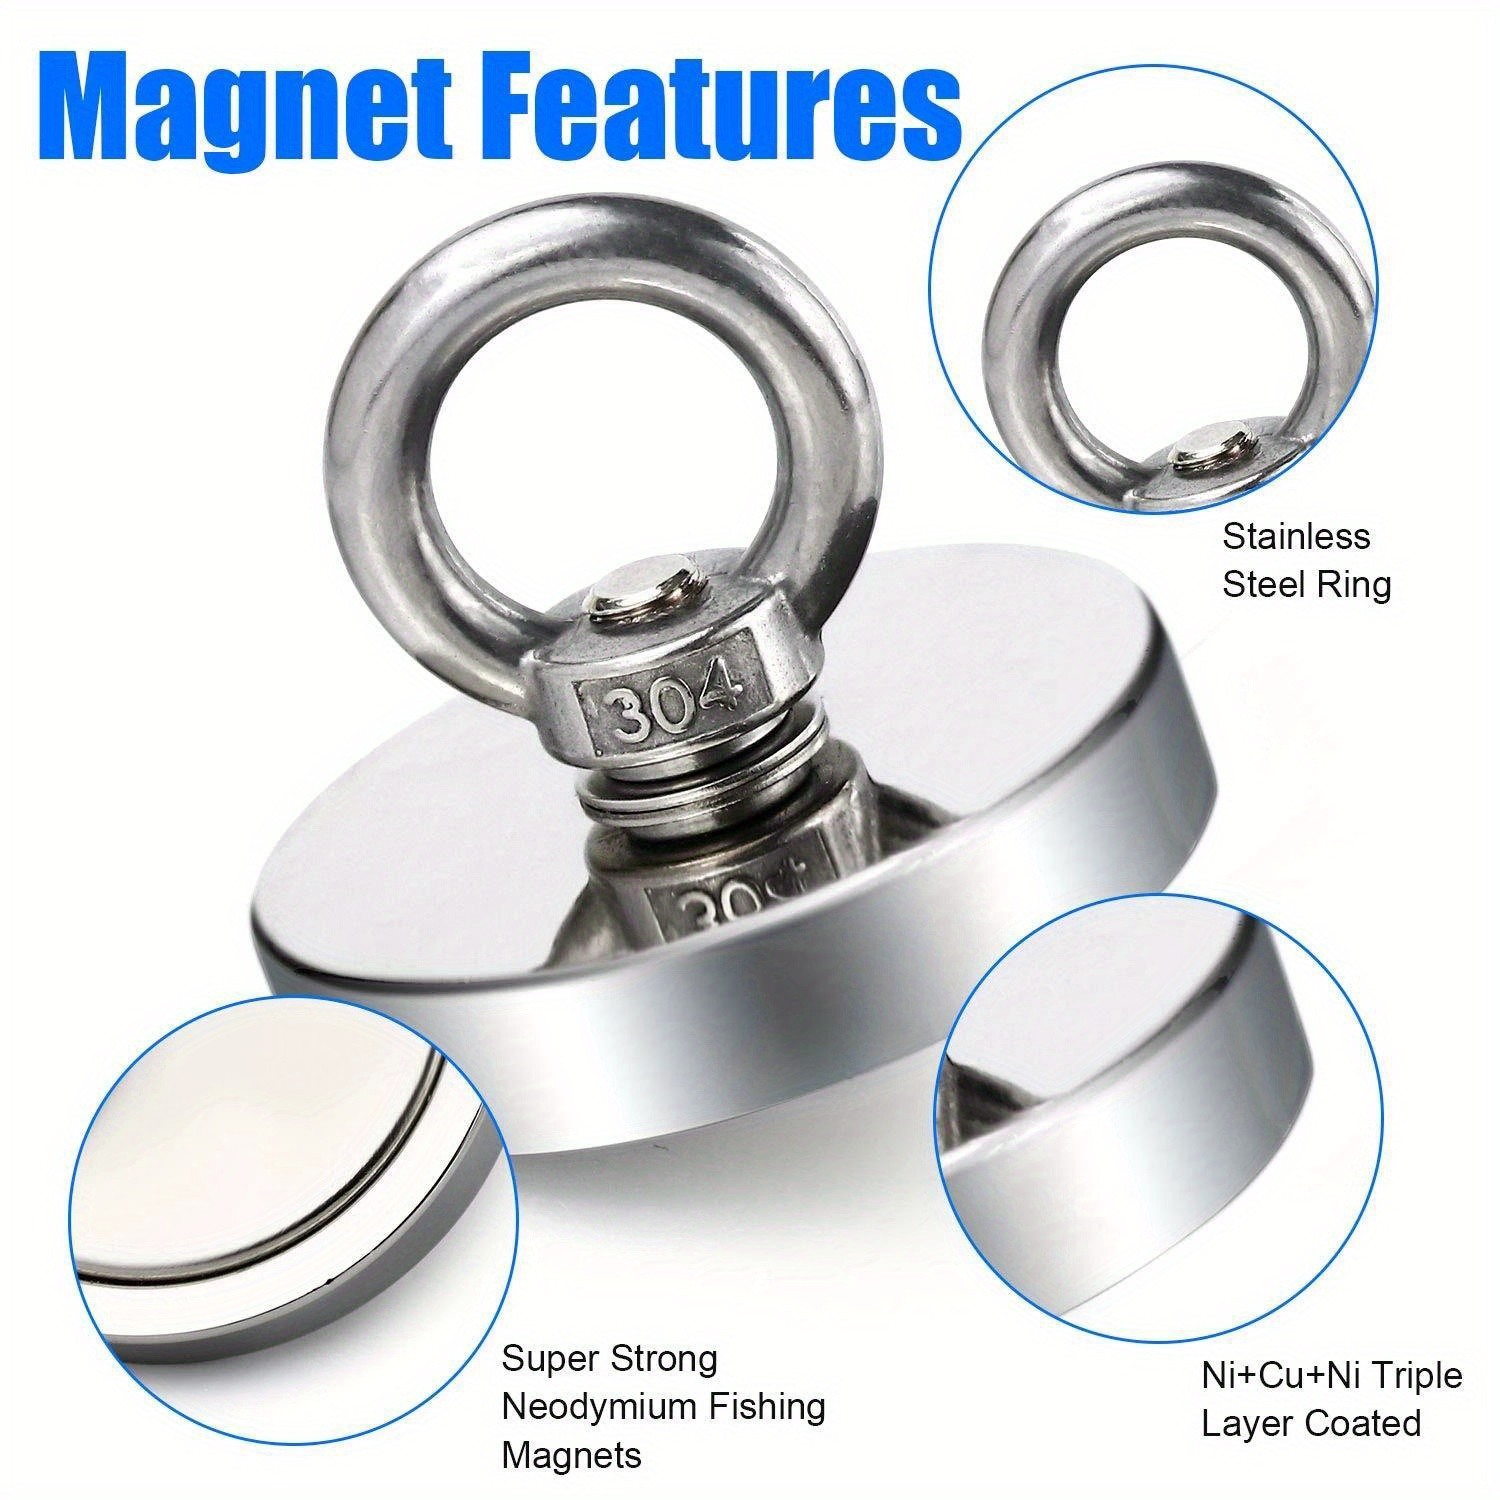 DIYMAG Super Strong Neodymium Fishing Magnets, 95lbs(43 KG) Pulling Force  Rare Earth Magnet with Countersunk Hole Eyebolt-Dia 1.26 inch(32 mm) for  Retrieving in River and Magnetic Fishing - 10 P price in